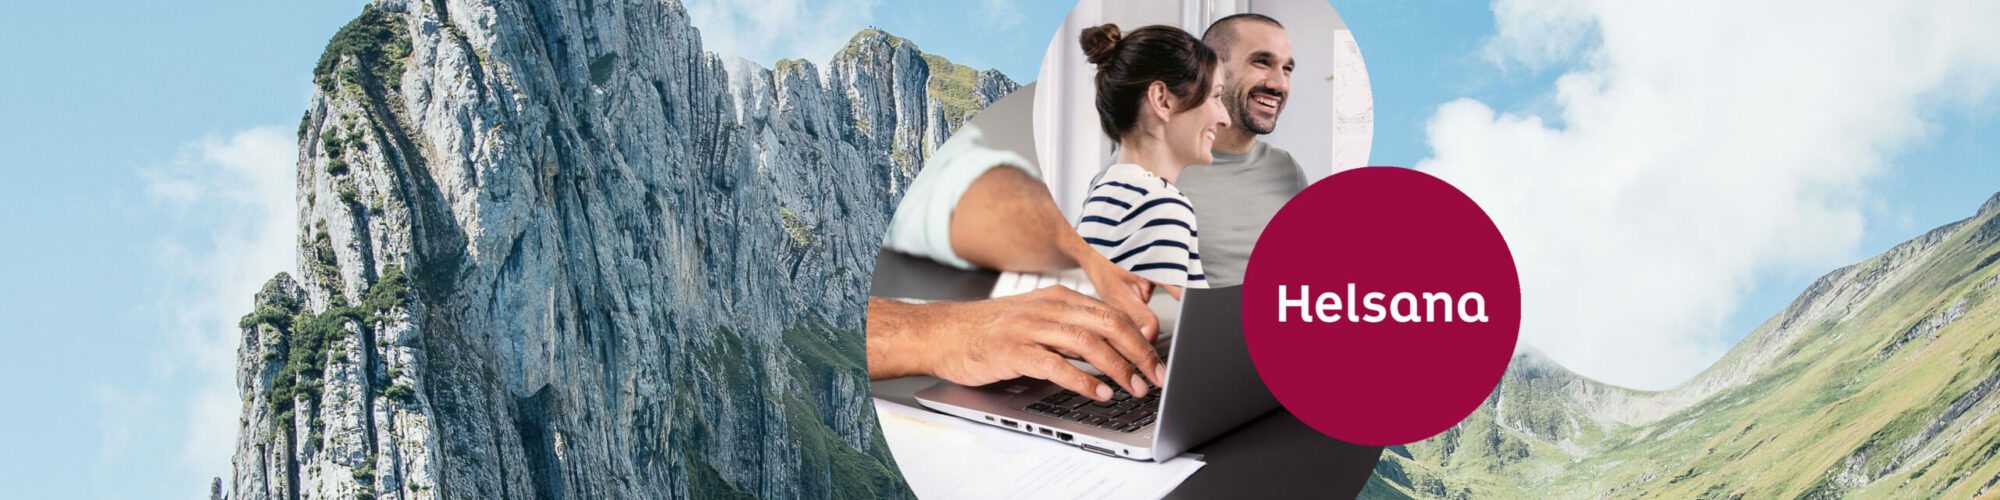 Cover of the Helsana Success Story on portfolio management with mountains in the background and the Helsana logo, two smiling people and a laptop in the foreground.